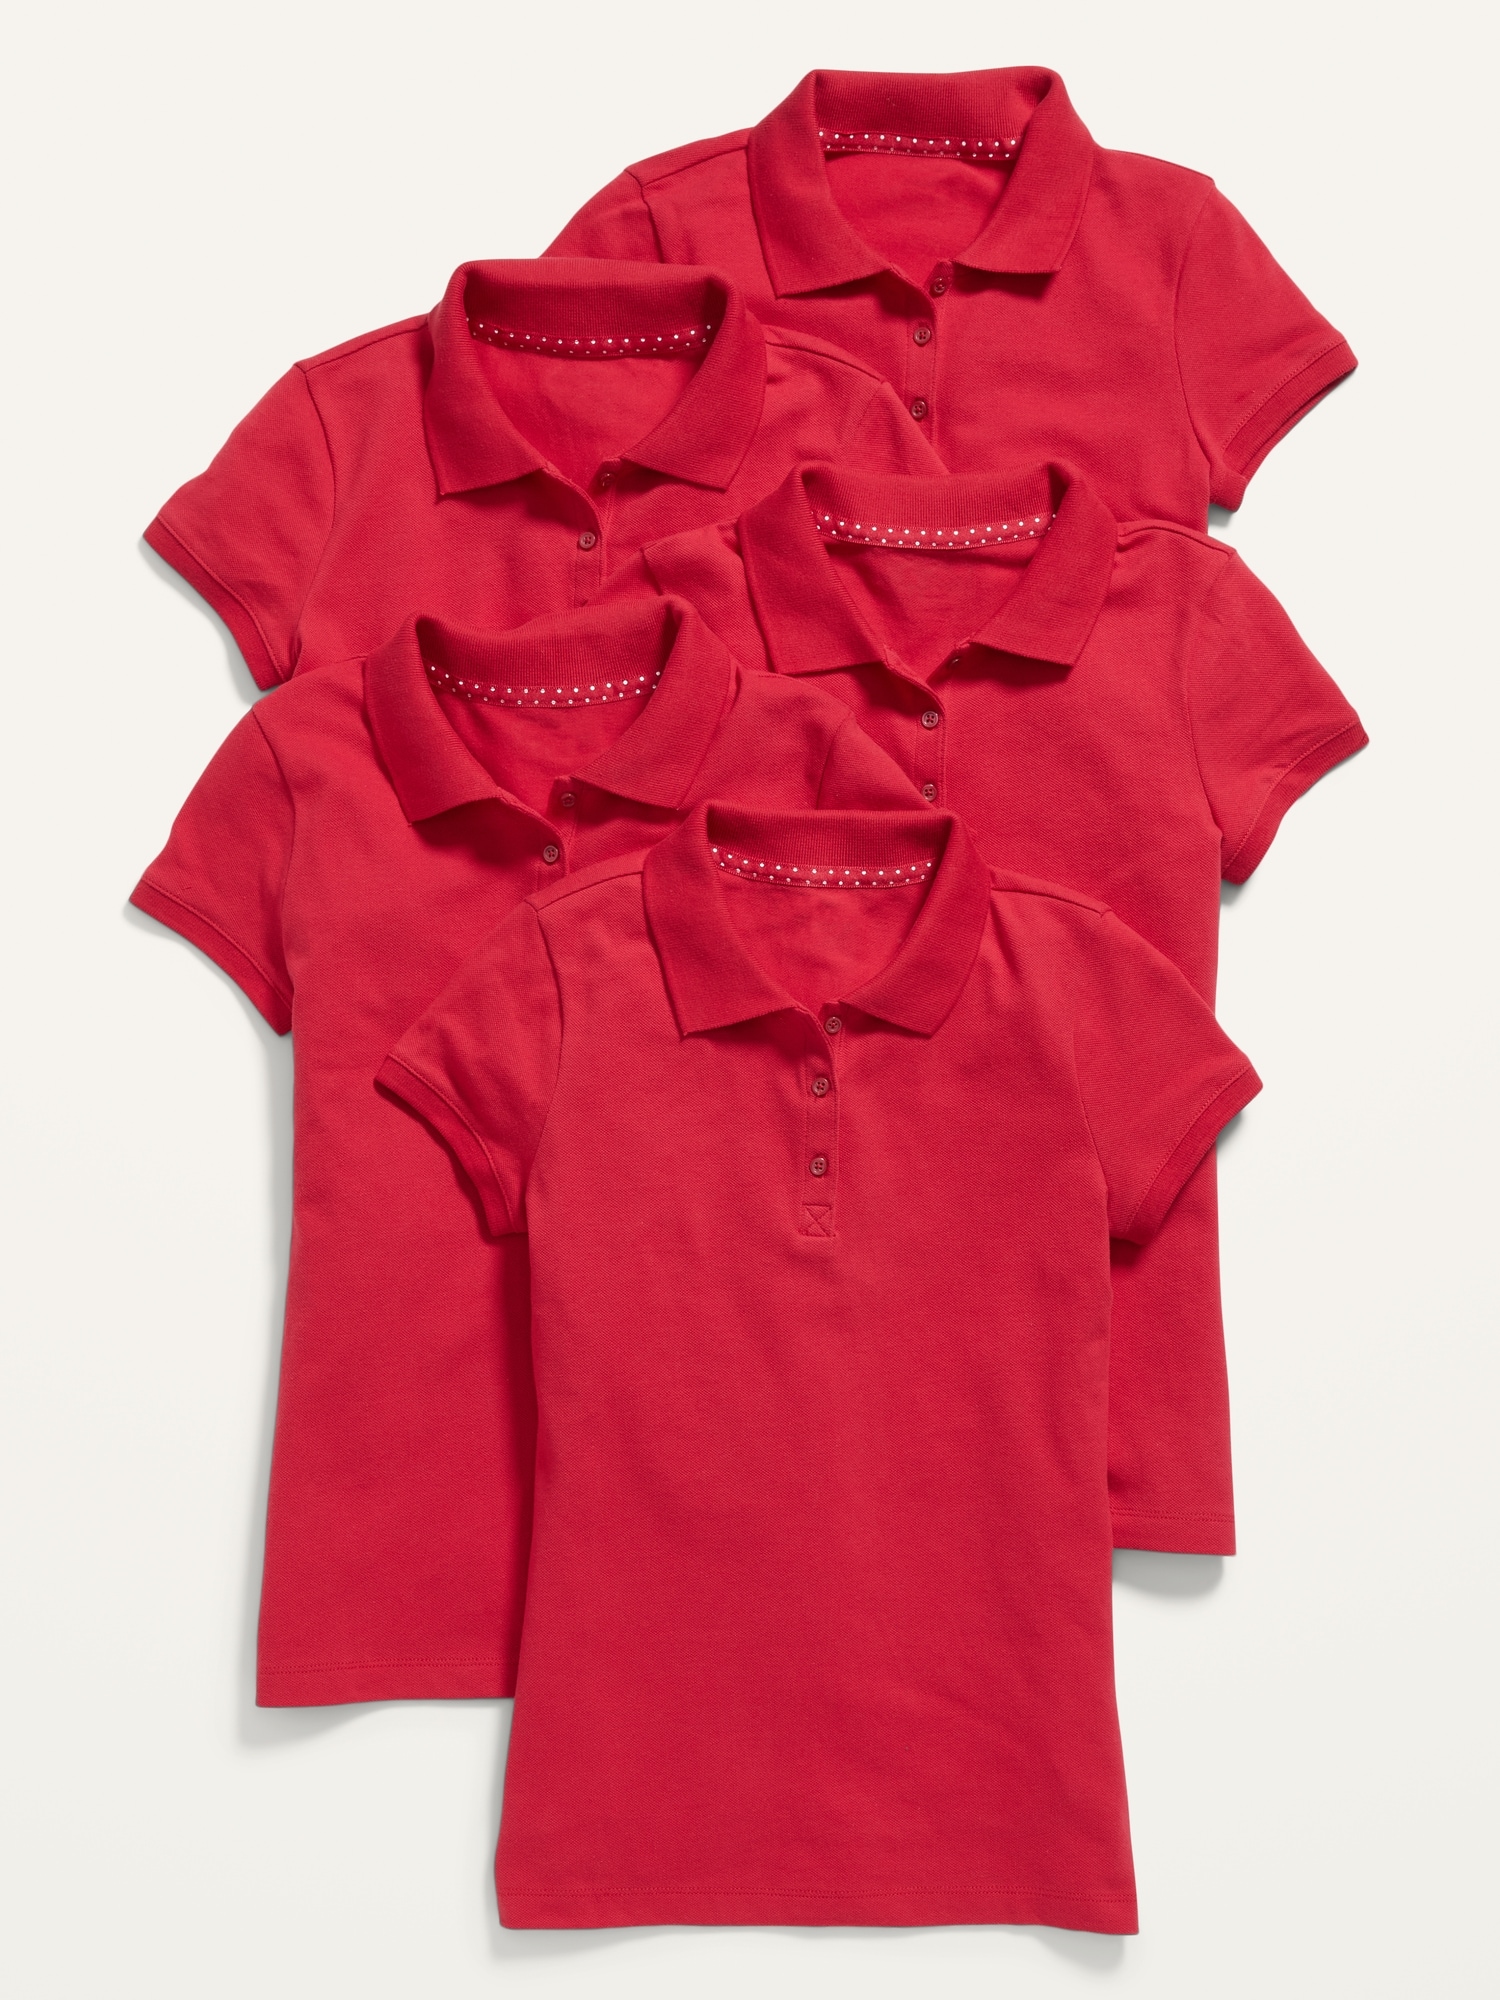 Old Navy Uniform Pique Polo Shirt 5-Pack for Girls red. 1